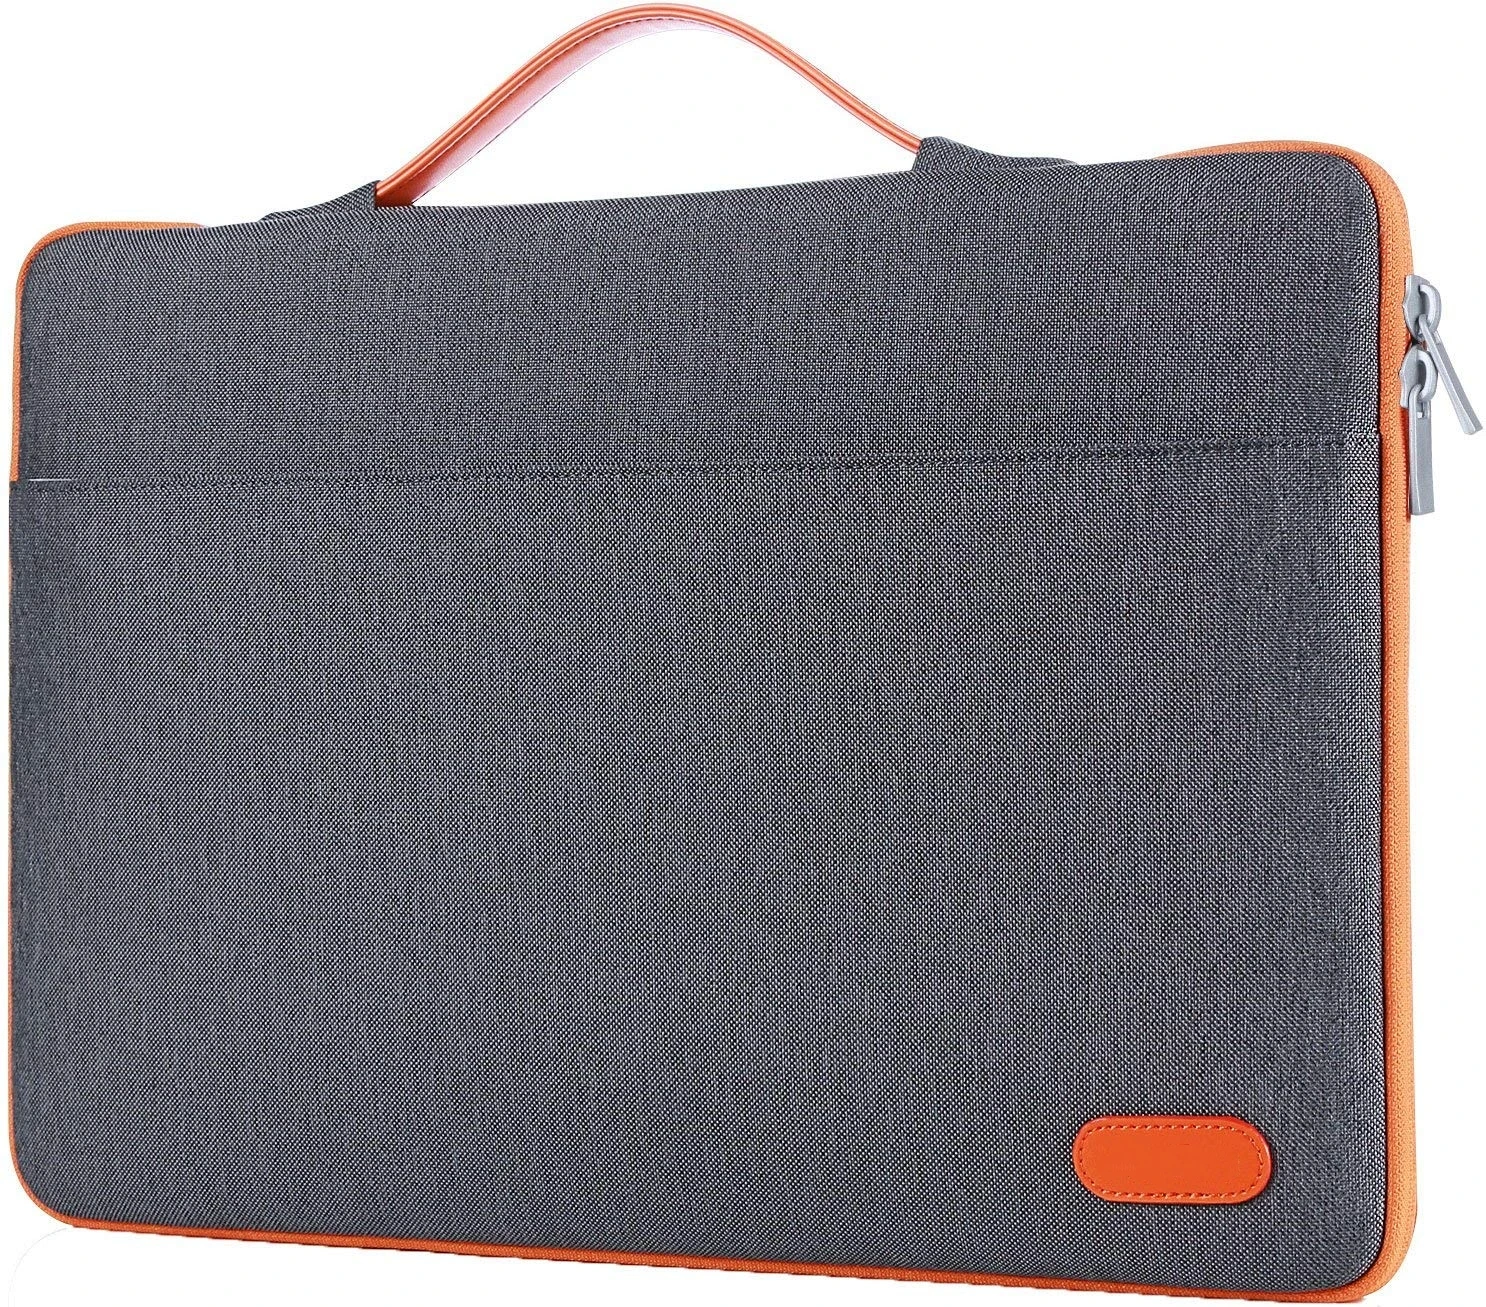 Polyester 14-15 Inch Ultra-book Laptop Carrying Case laptop sleeve